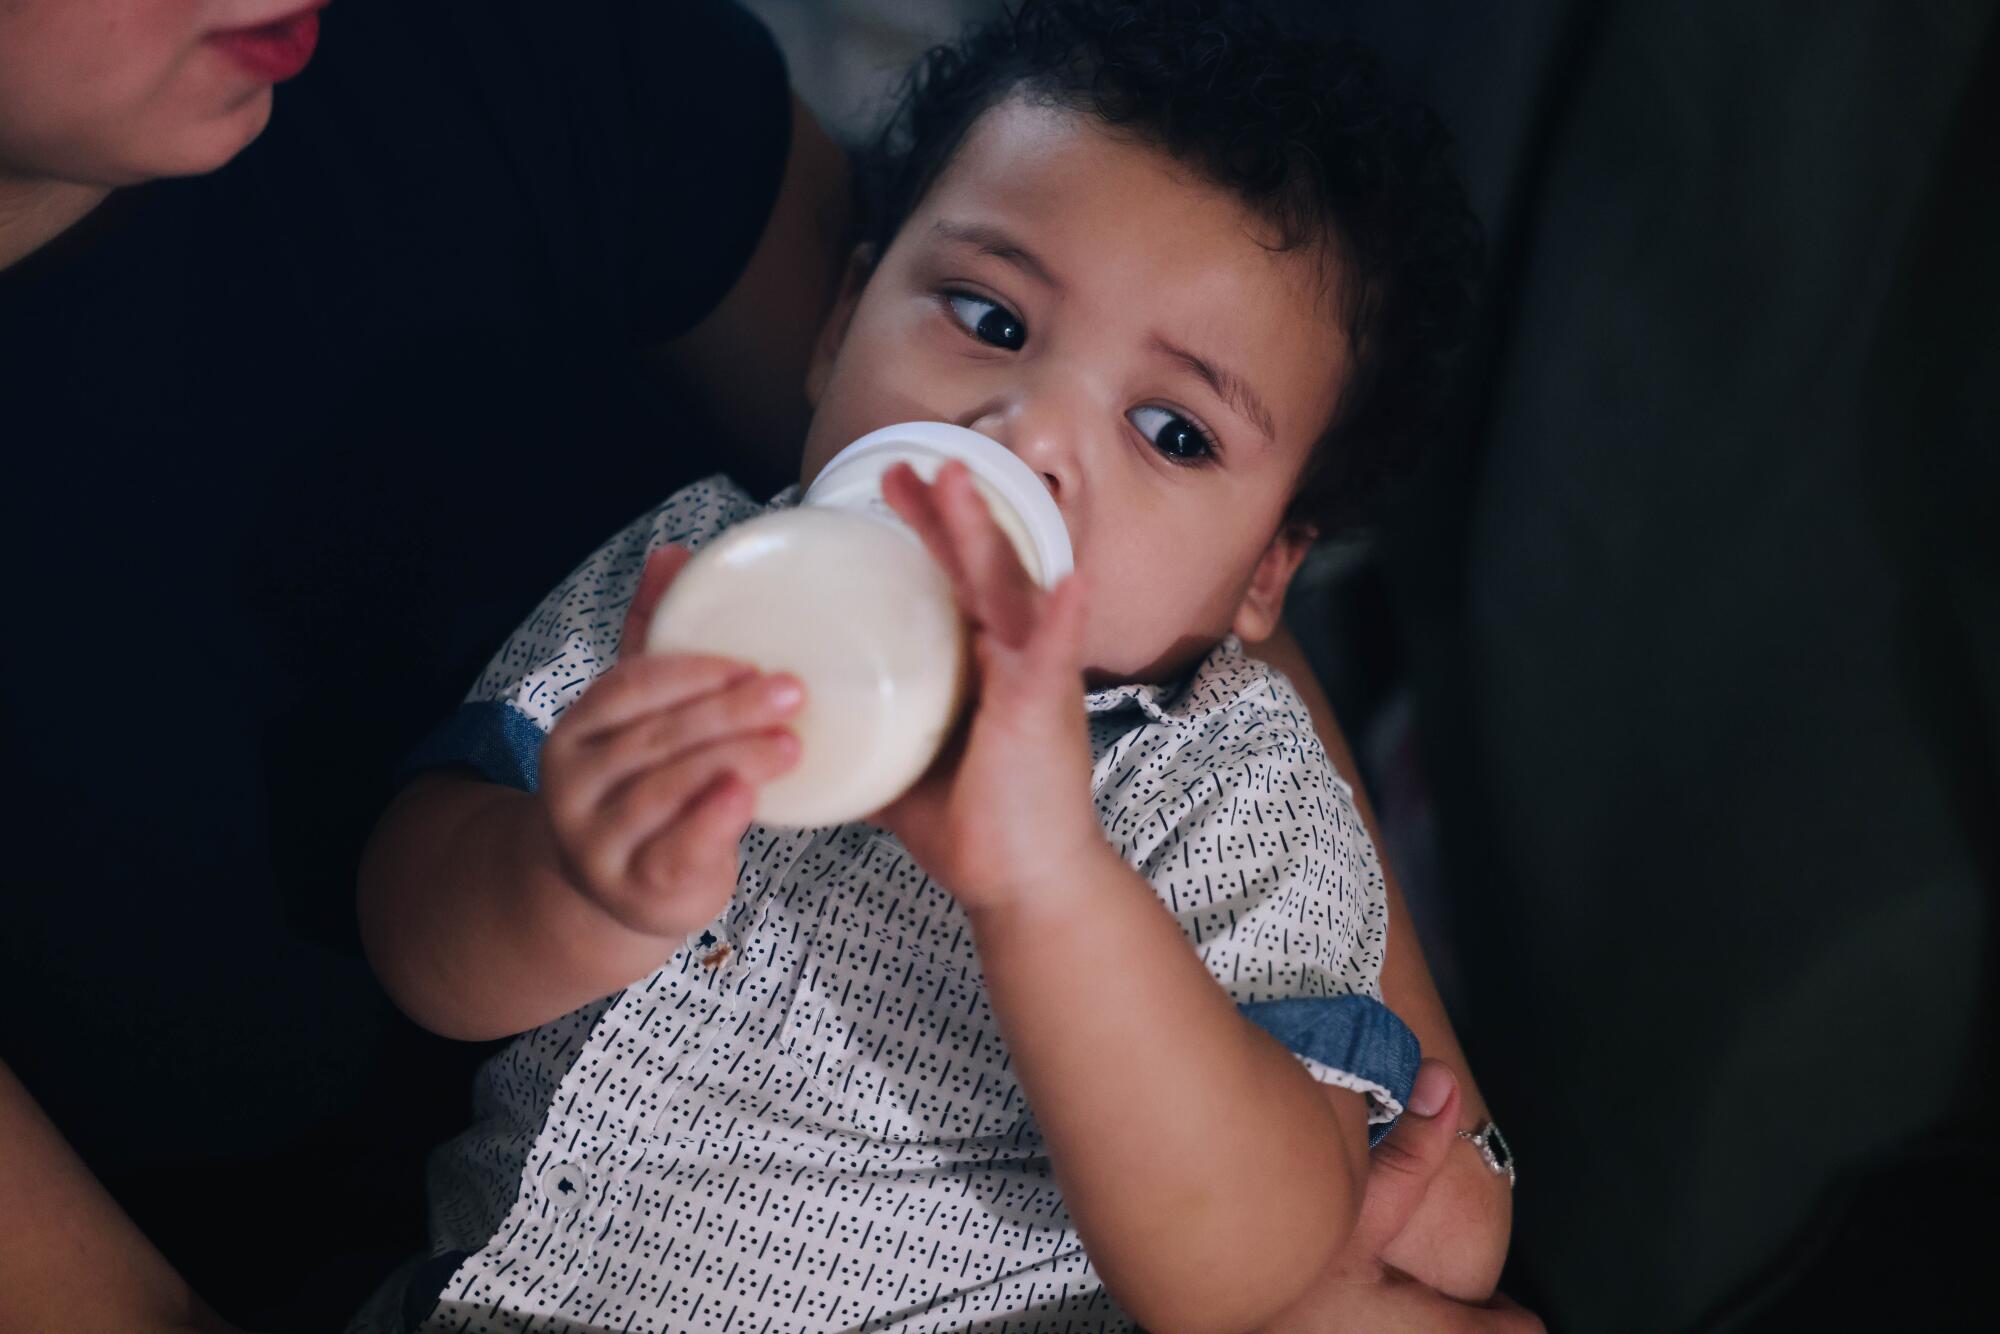 A baby drinks from a bottle.